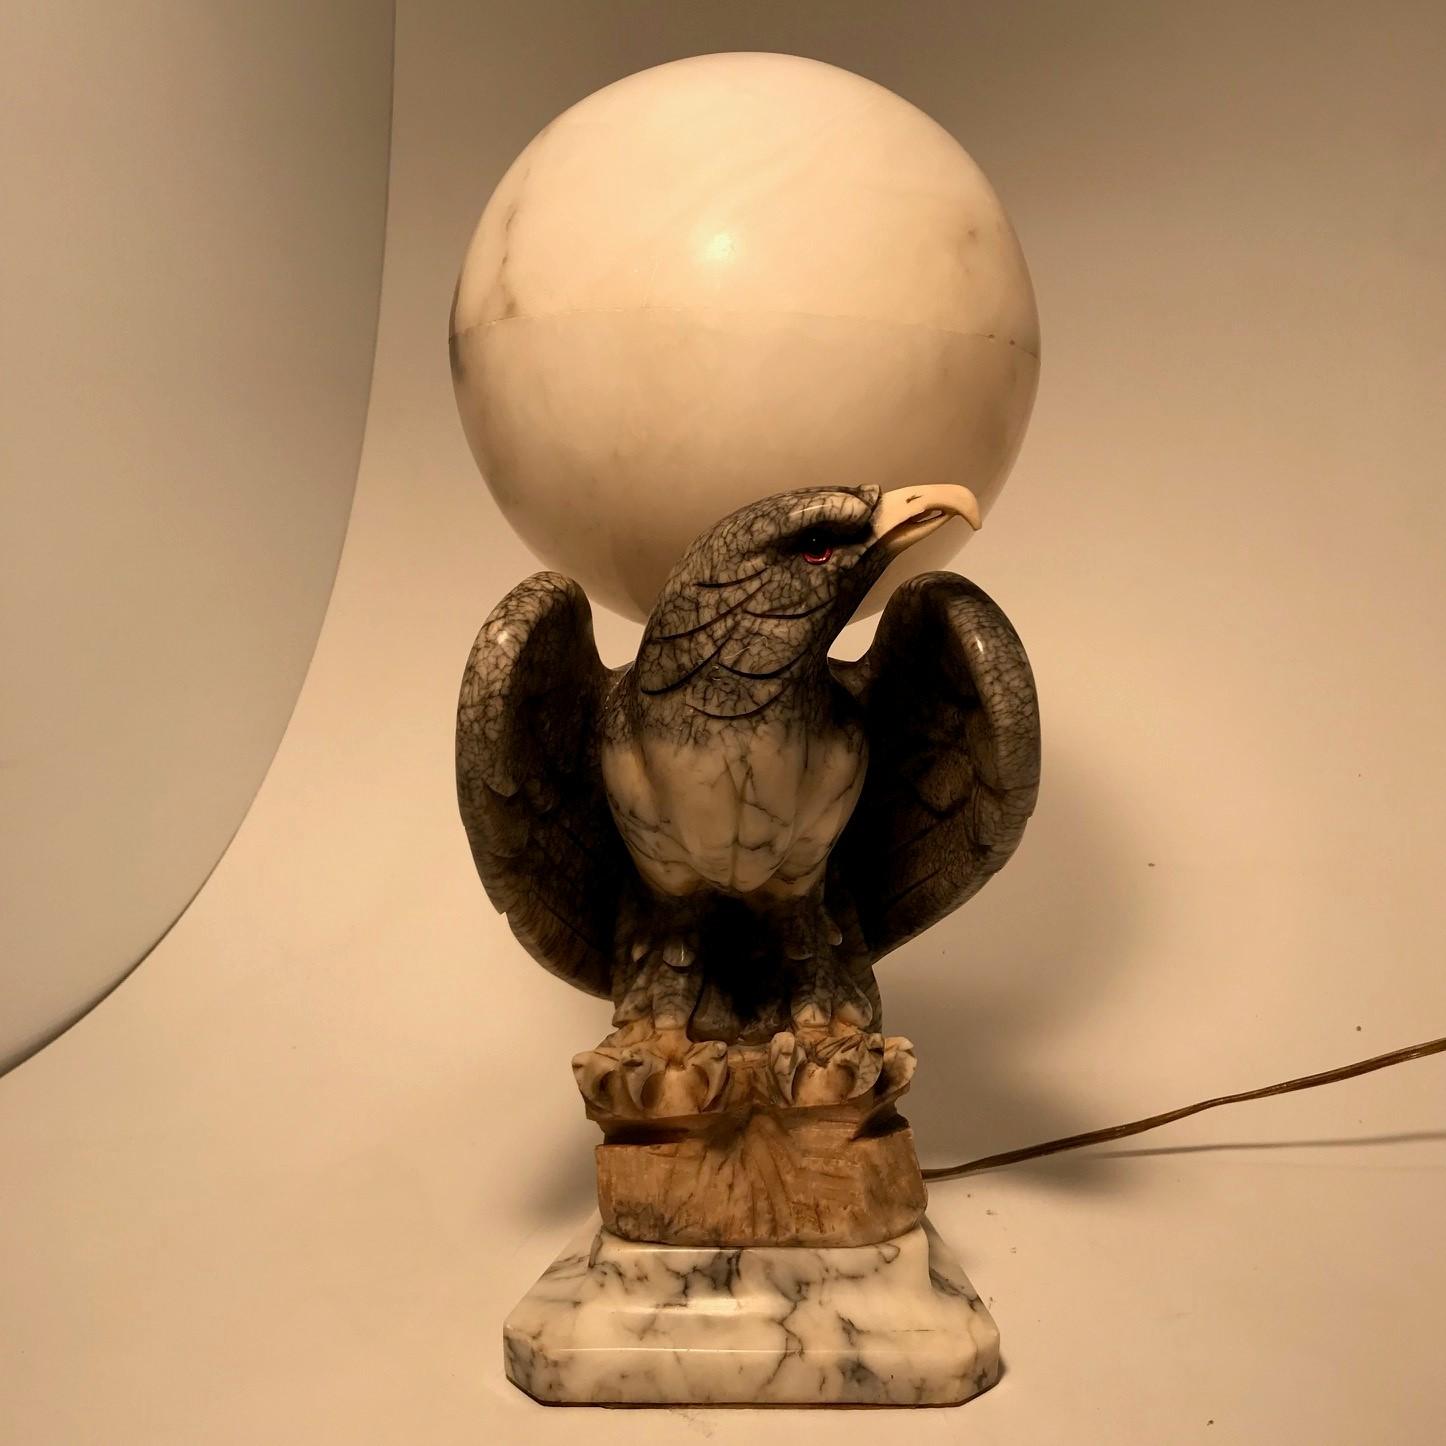 These sculptural lights in plain and stained alabaster are increasingly hard to find. This one, dating from perhaps the second quarter of the 20th century, is in exceptional condition, even the spherical shade is undamaged and unstained. The eagle